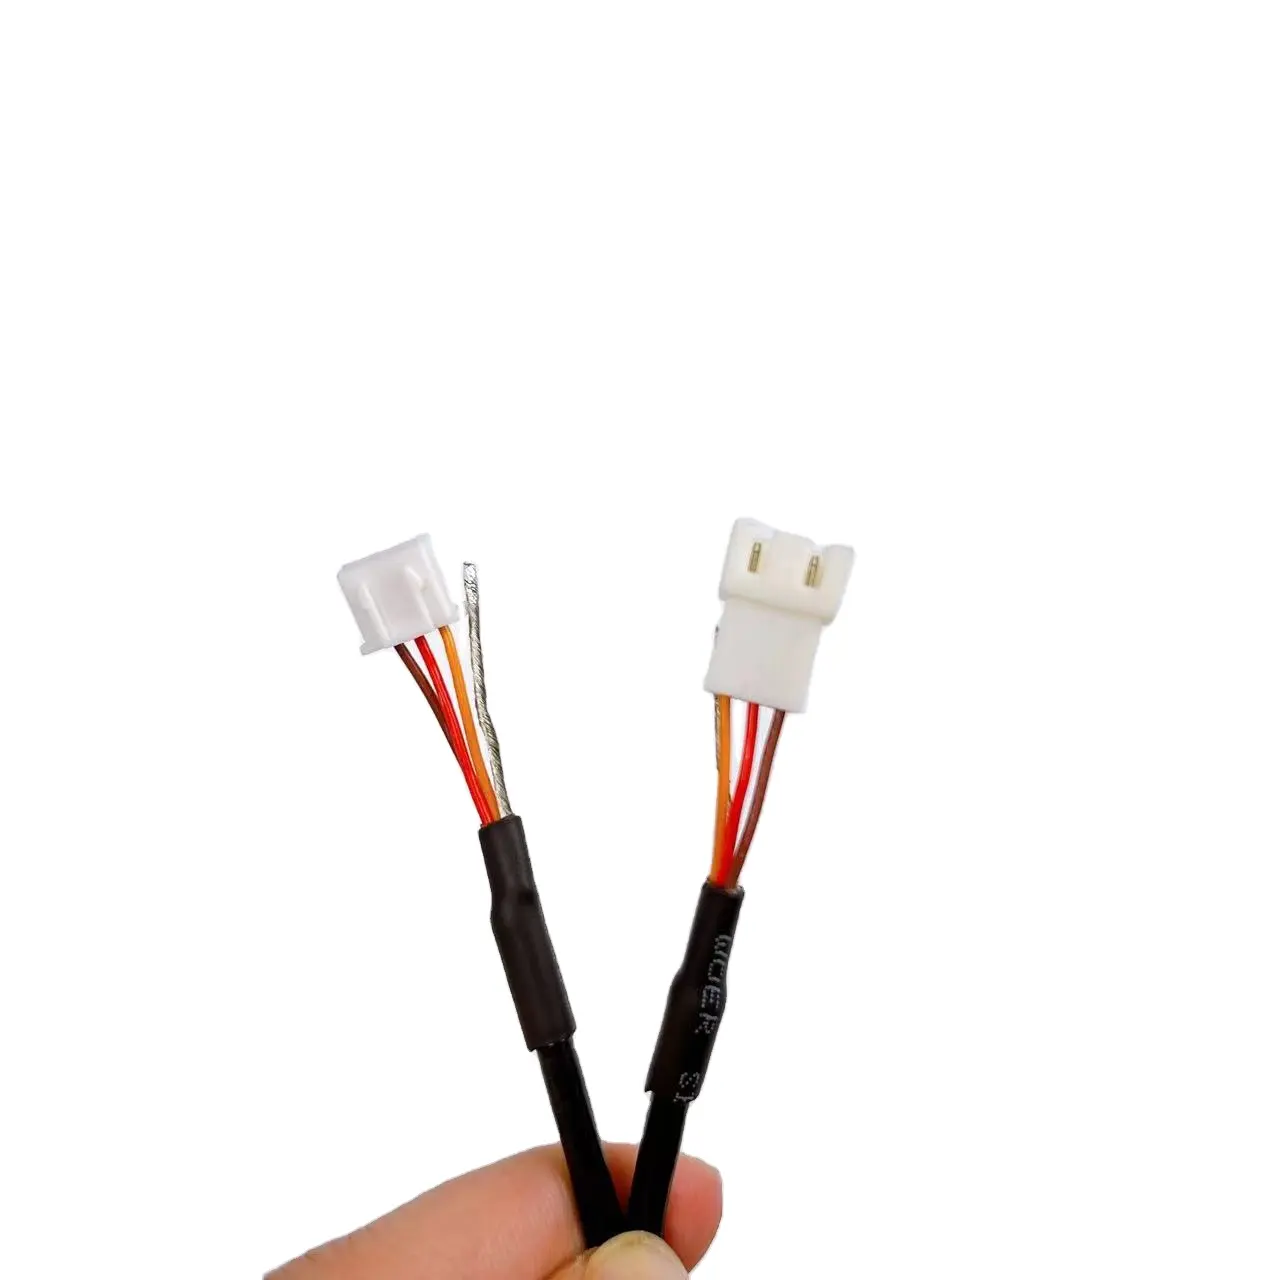 Extension Plug 3 cores shield cable for 2 Cell JST-XH Type RC Lipo Battery Balance Cable Extension Lead for Lipo Battery